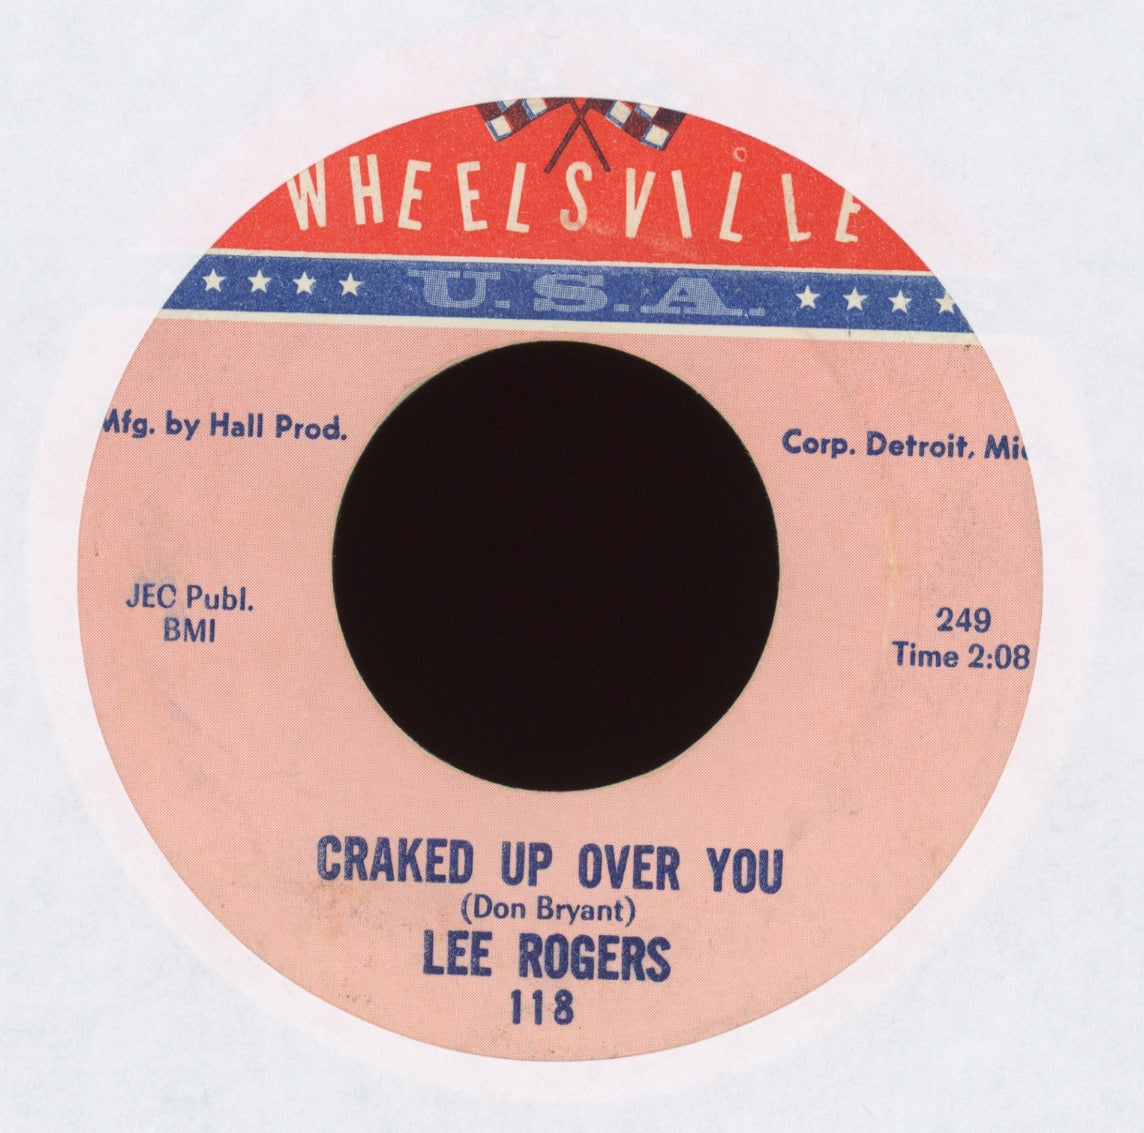 Lee Rogers - Craked Up Over You on Wheelsville Northern Soul 45